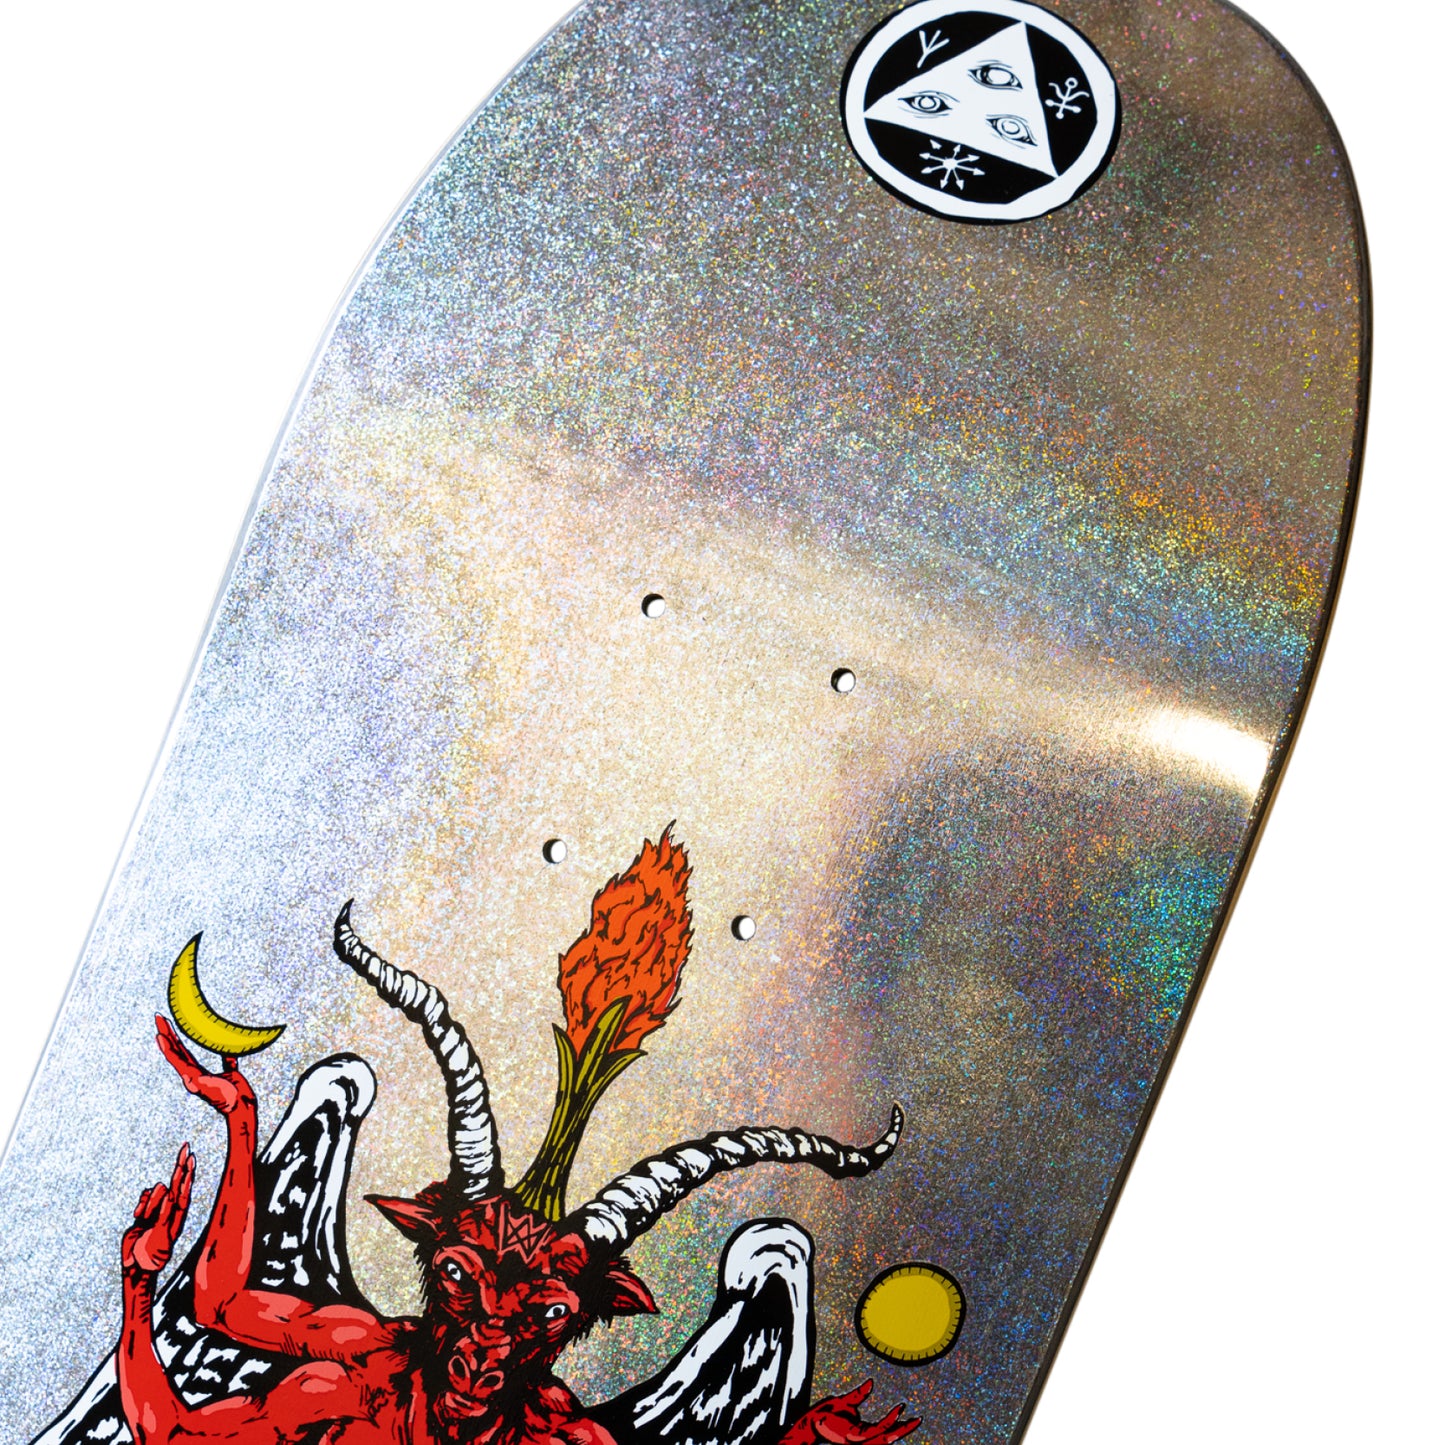 WELCOME Ryan Lay Bapholit on Stonecipher Deck 8.6" Prism